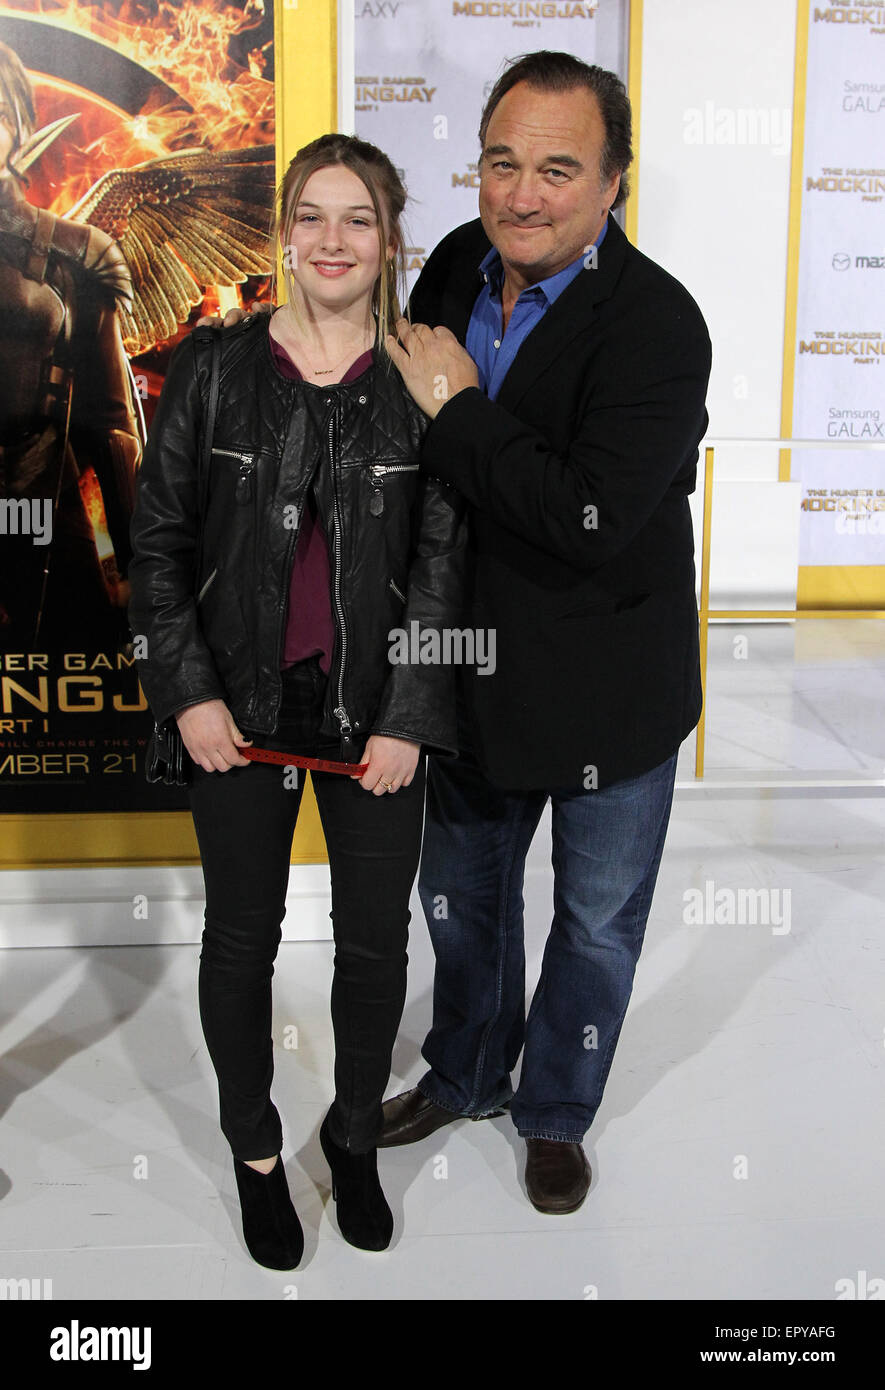 'The Hunger Games: Mockingjay - Part 1' Los Angeles premiere at Nokia Theatre - Arrivals  Featuring: Jim Belushi,Jamison Bess Belushi Where: Los Angeles, California, United States When: 17 Nov 2014 Credit: FayesVision/WENN.com Stock Photo